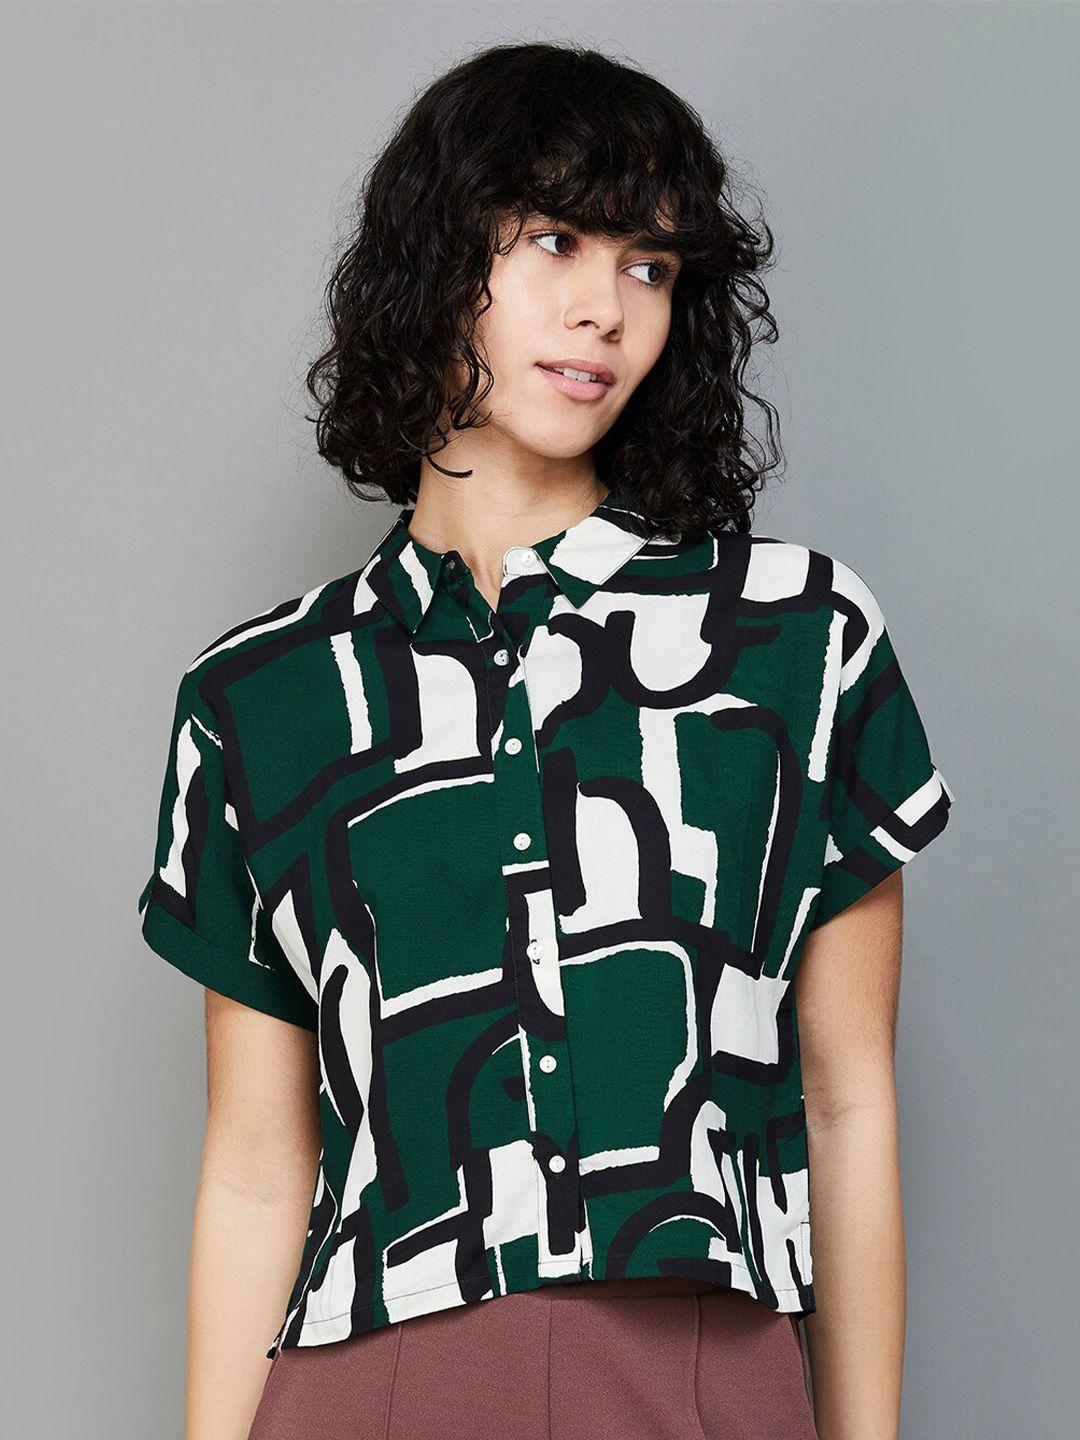 ginger-by-lifestyle-abstract-printed-extended-sleeves-shirt-style-top